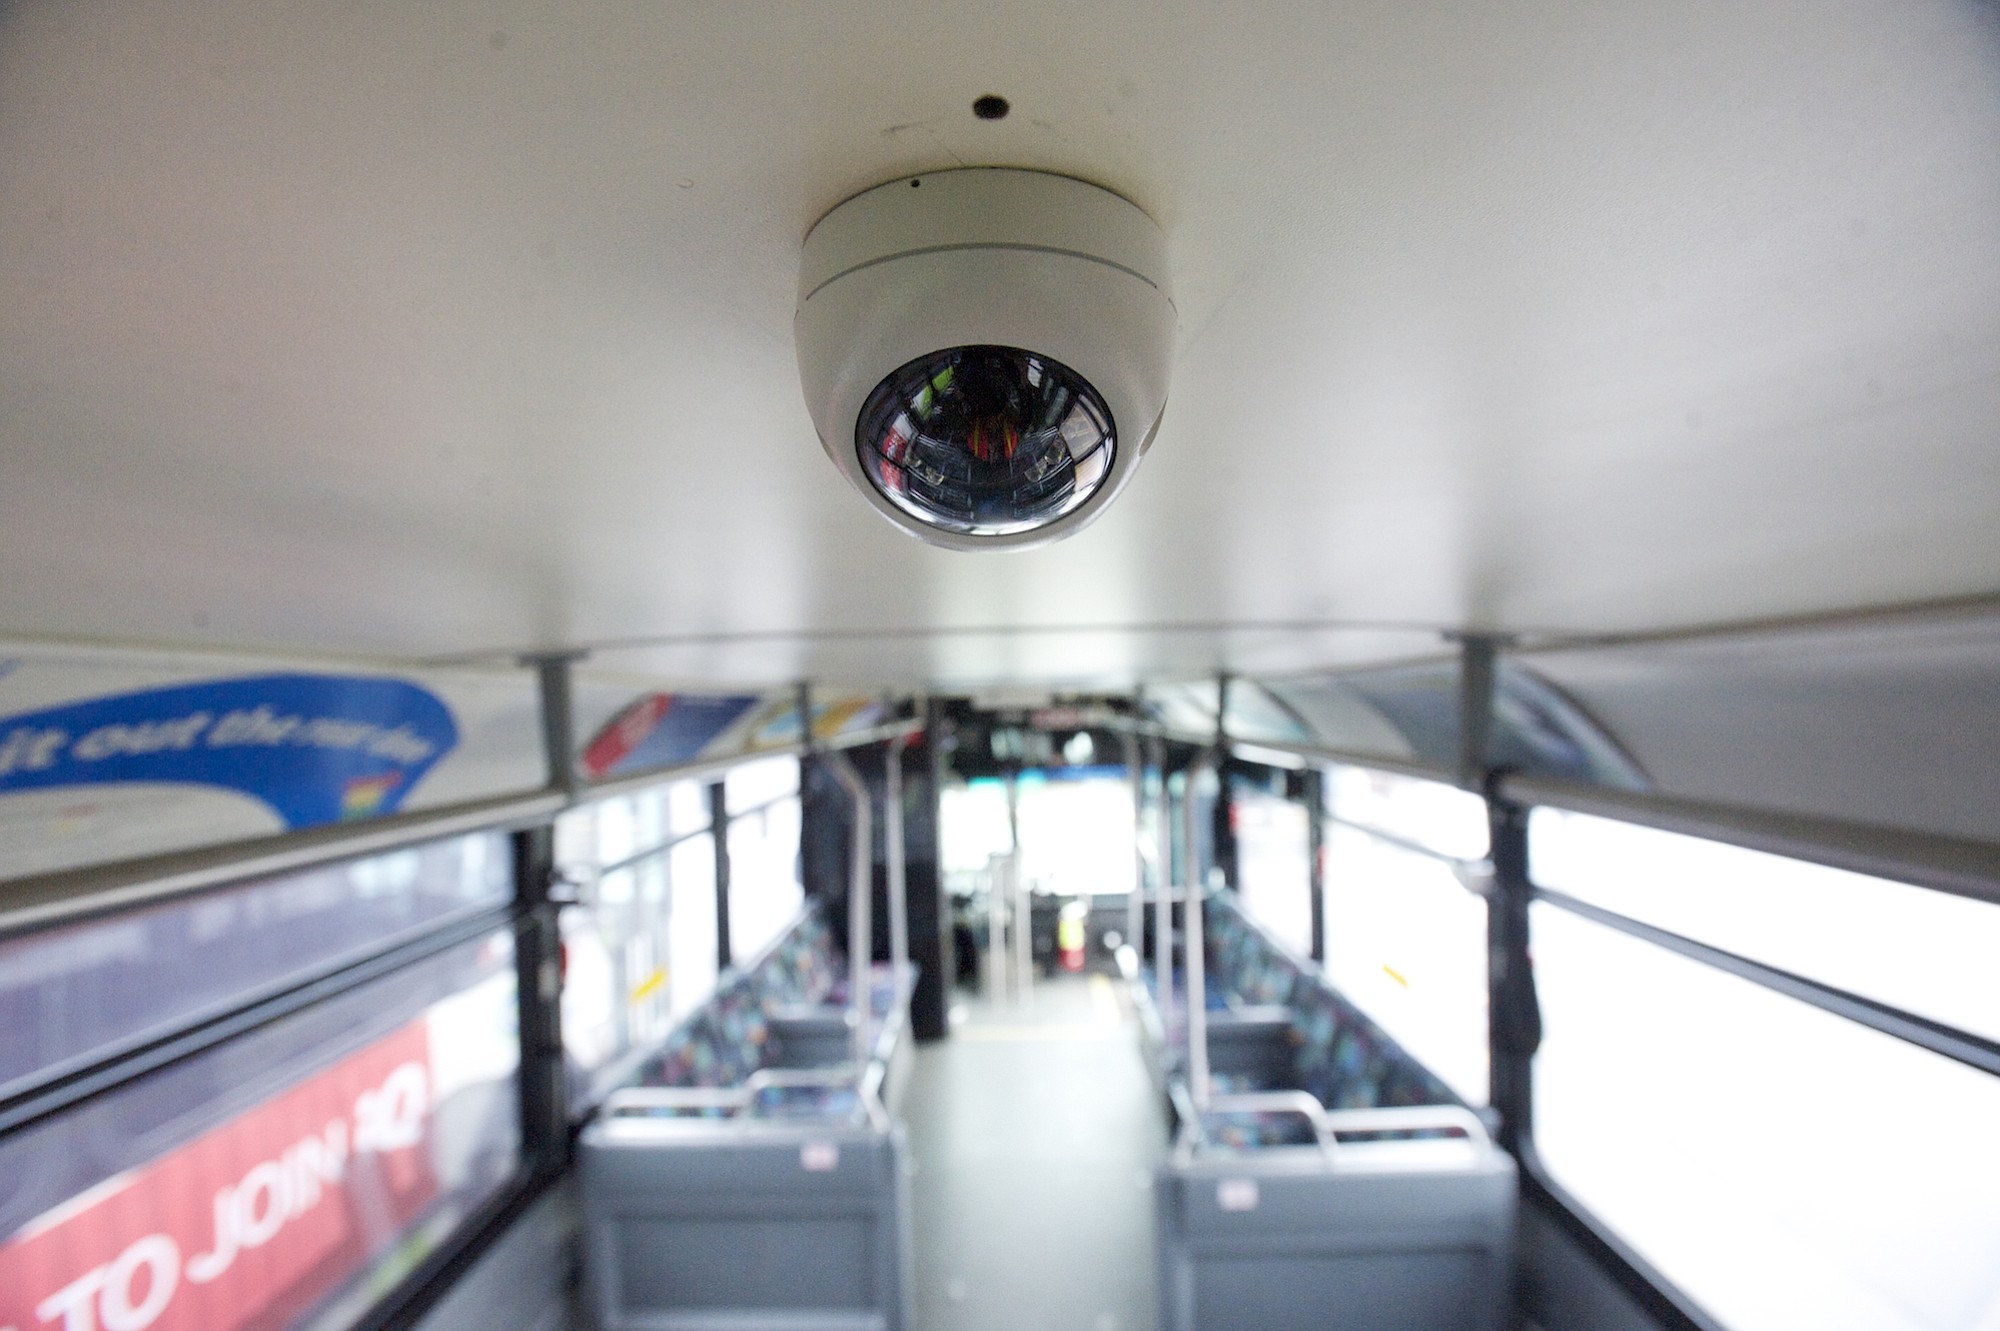 After a recent upgrade to its surveillance system, C-Tran now captures about 95 percent of the interior of a bus through on-board cameras, according to the agency.